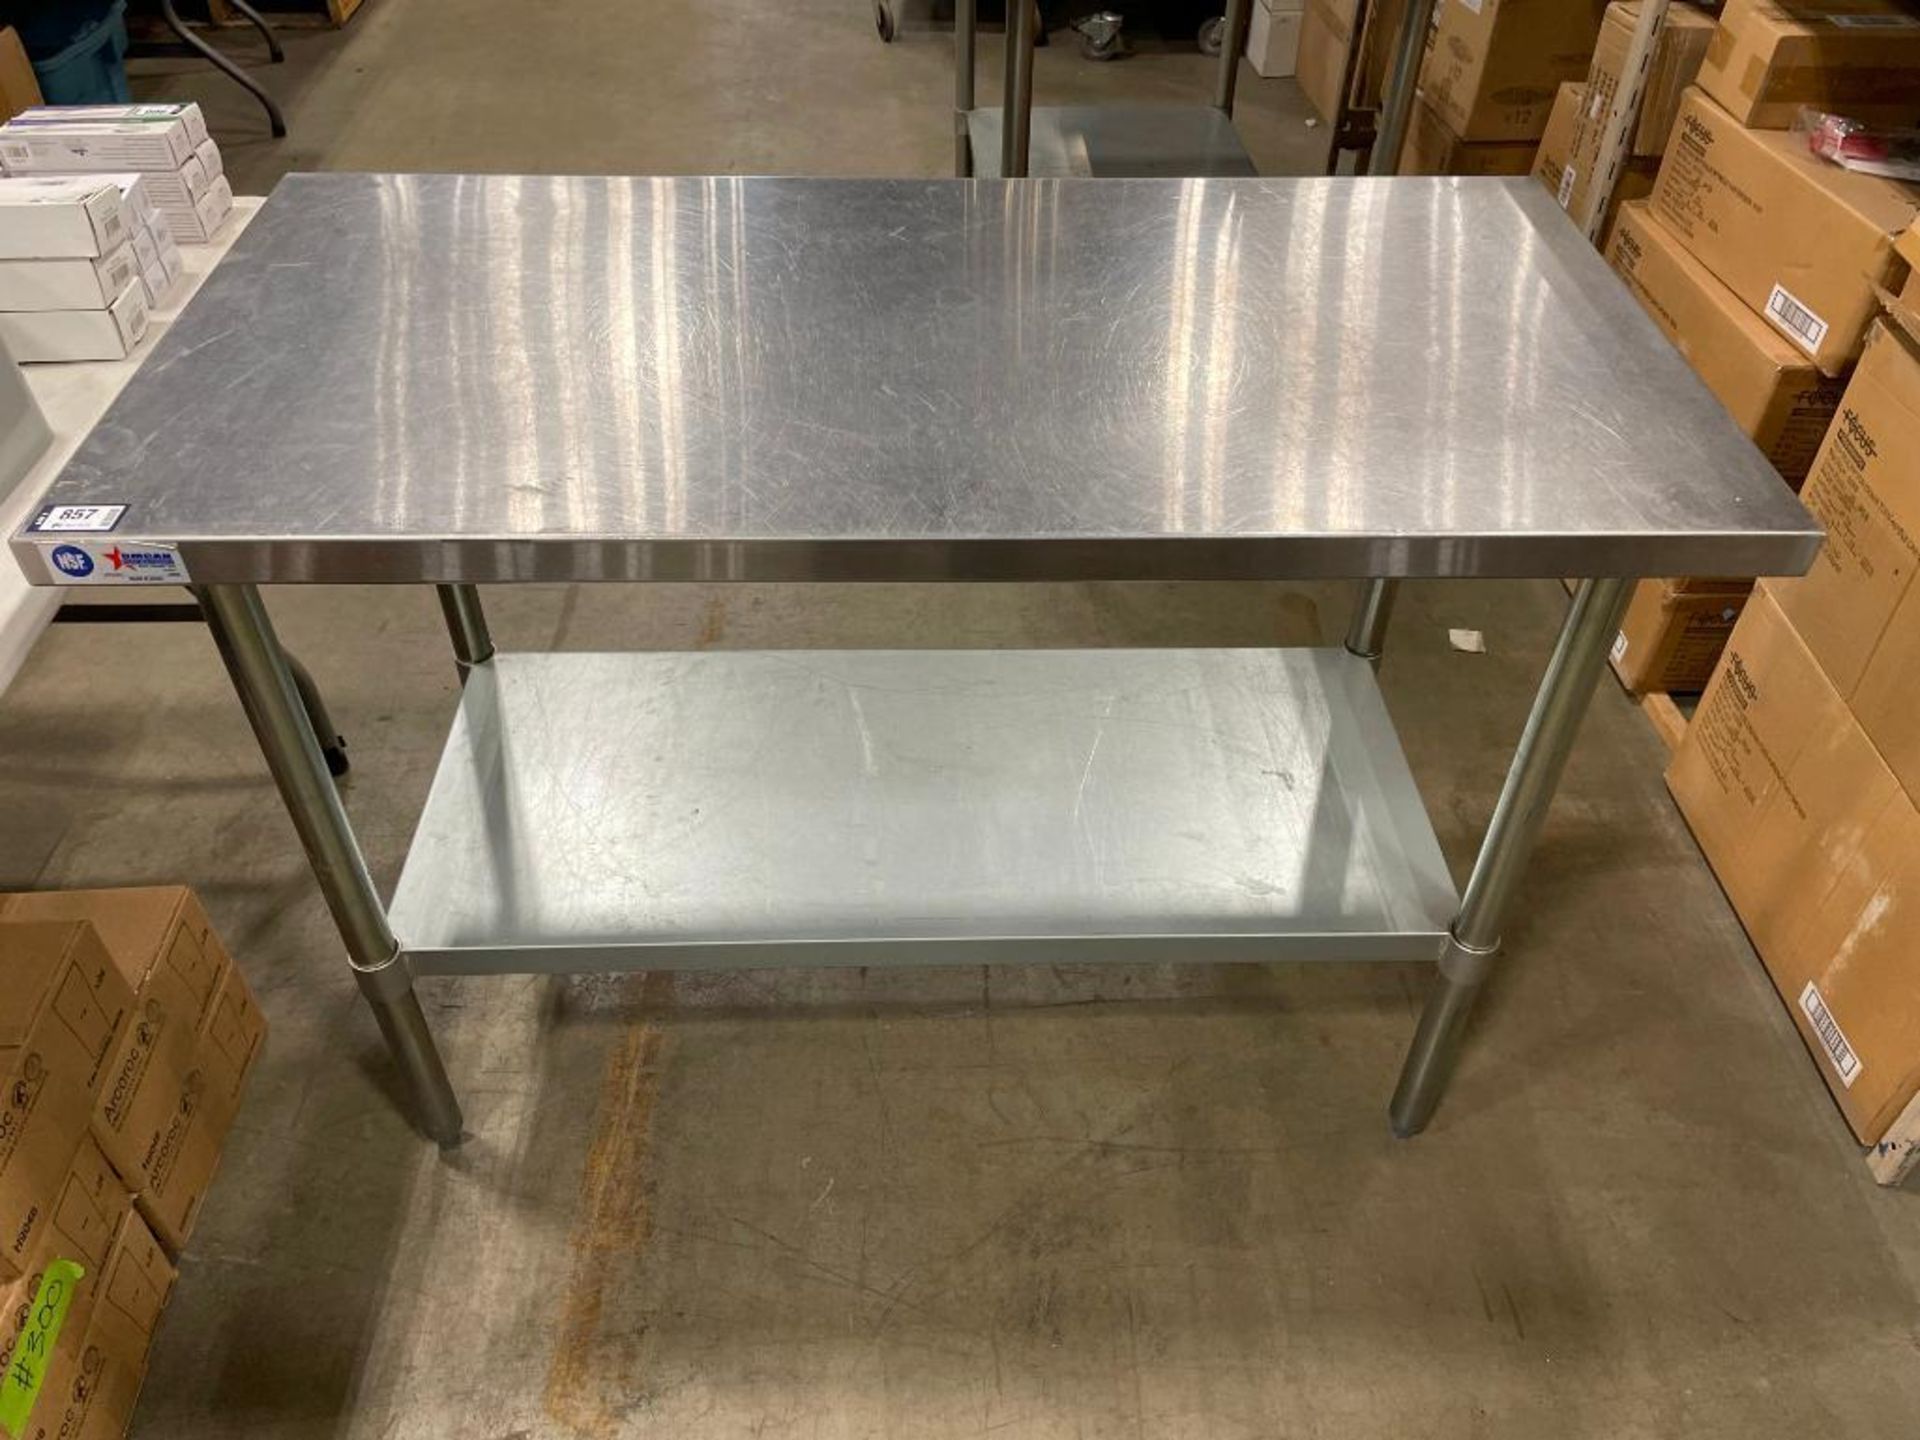 48" X 24" STAINLESS STEEL WORK TABLE